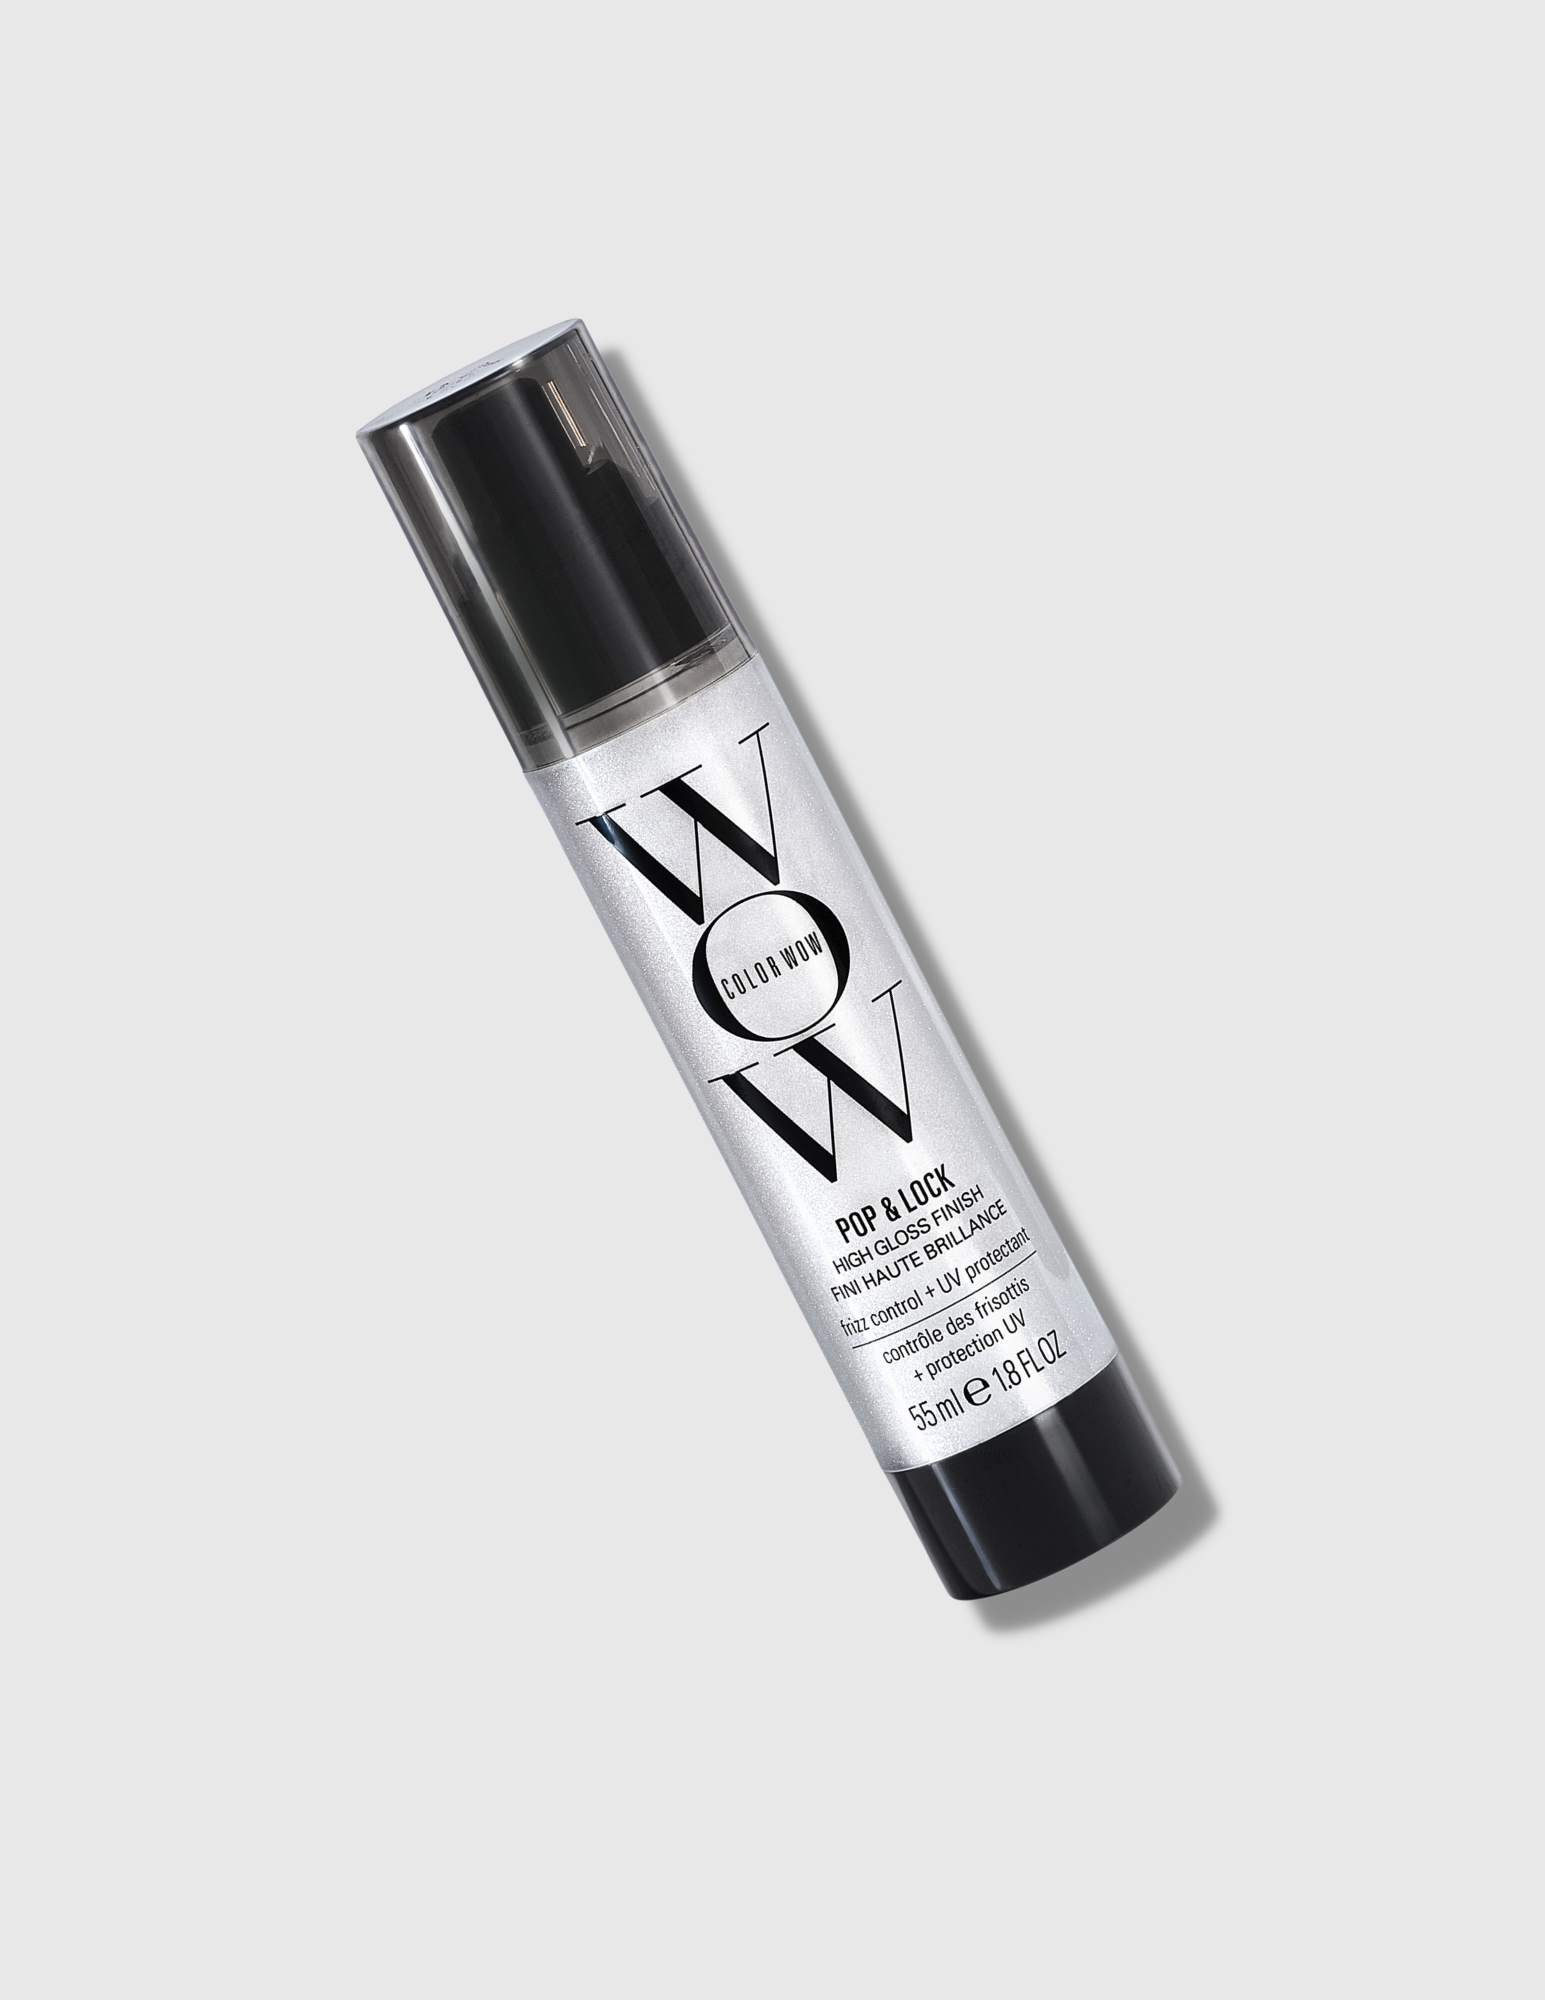 COLOR WOW Pop + Lock Frizz Control Serum: Prevent Color Fade, Seal Split  Ends, and Add Gloss - Get Silky, Shiny Hair!